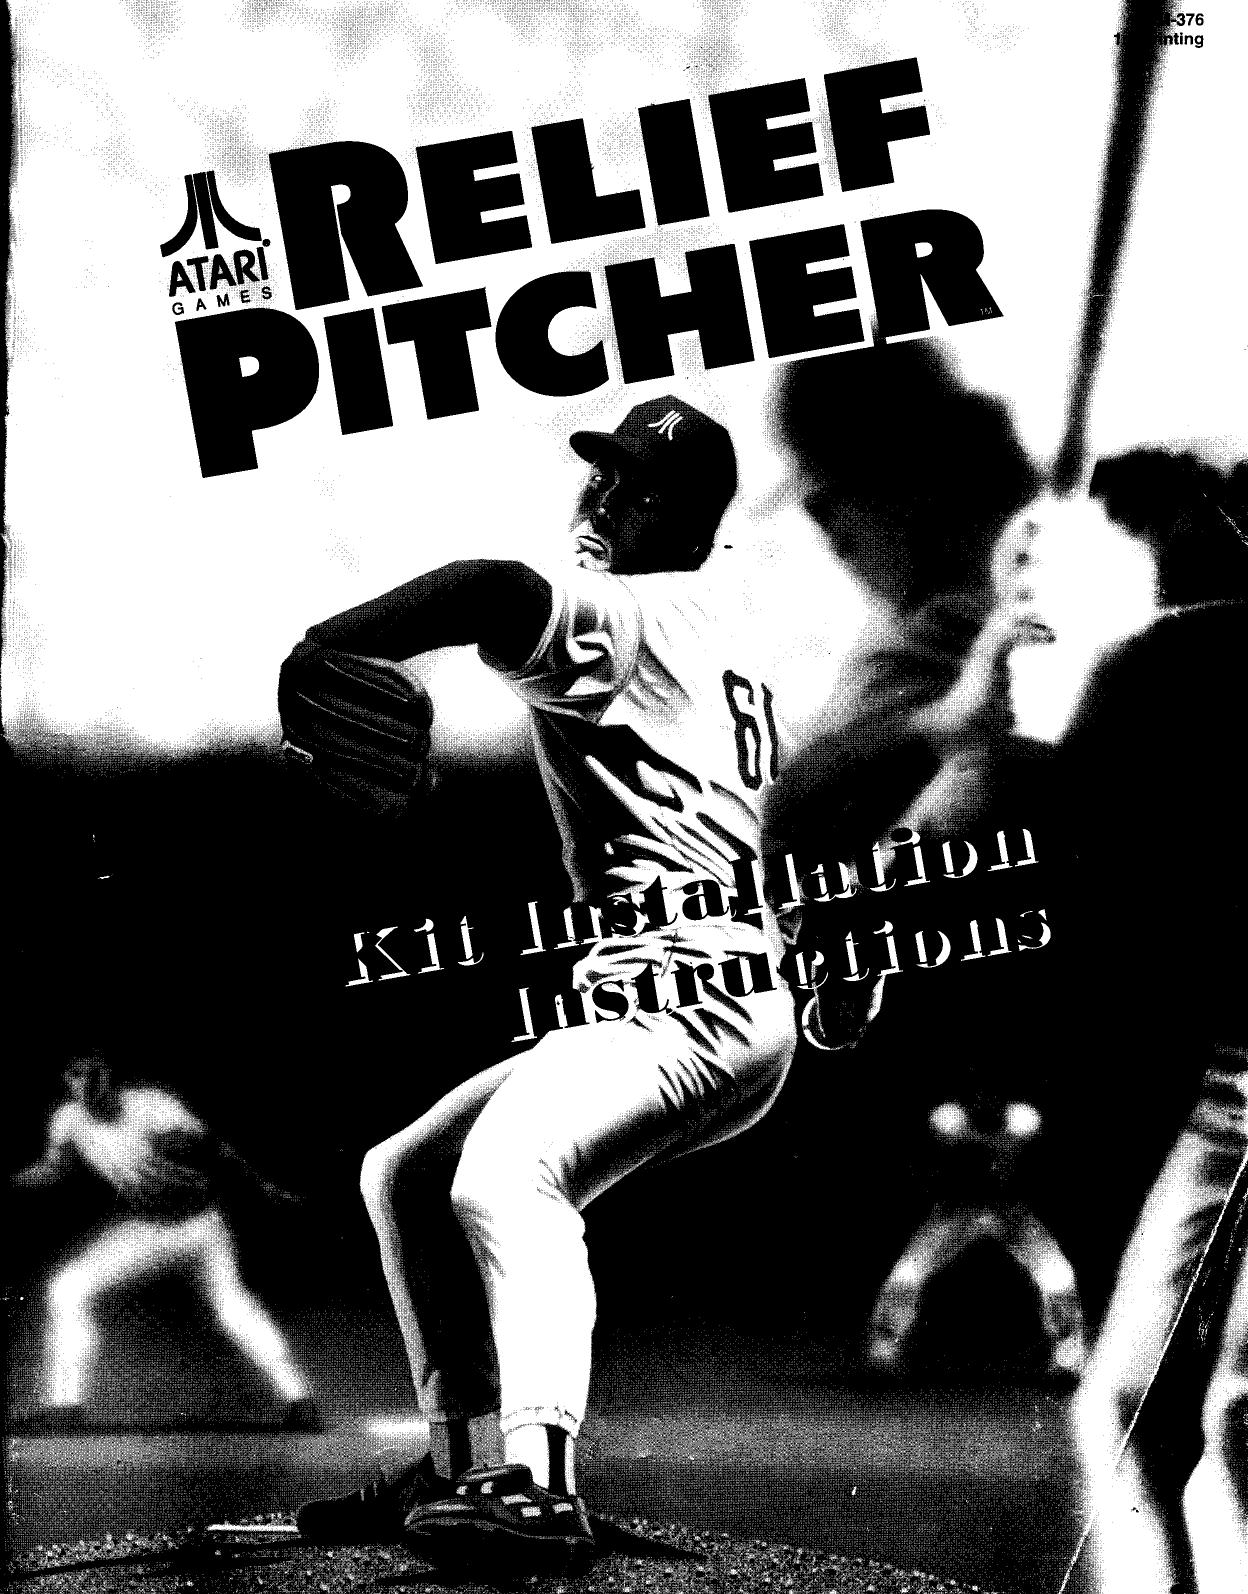 Relief Pitcher TM-376 1st Printing